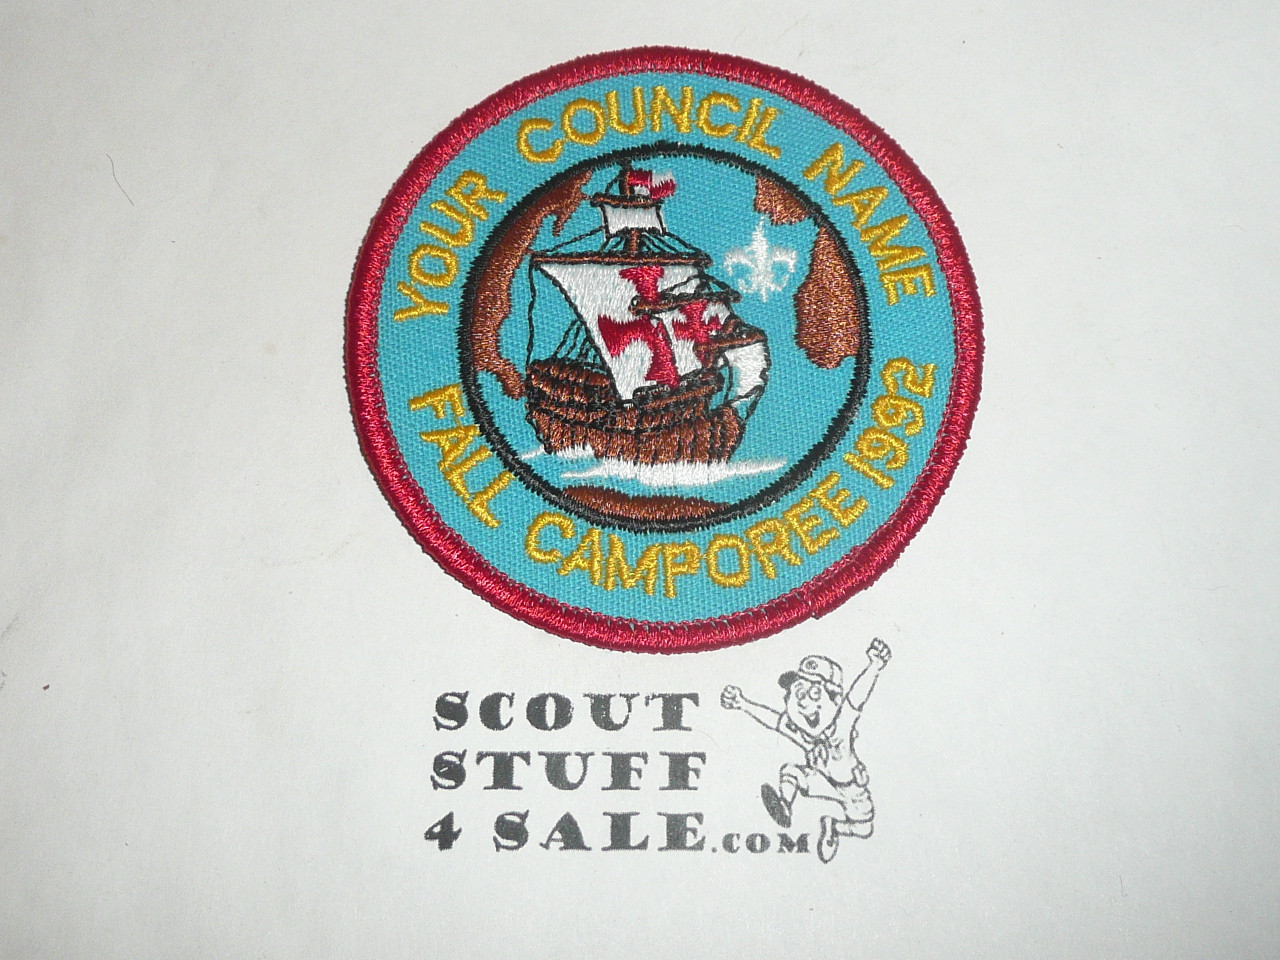 Your Council Name Sample Patch, 1992 Fall Camporee, pirate ship